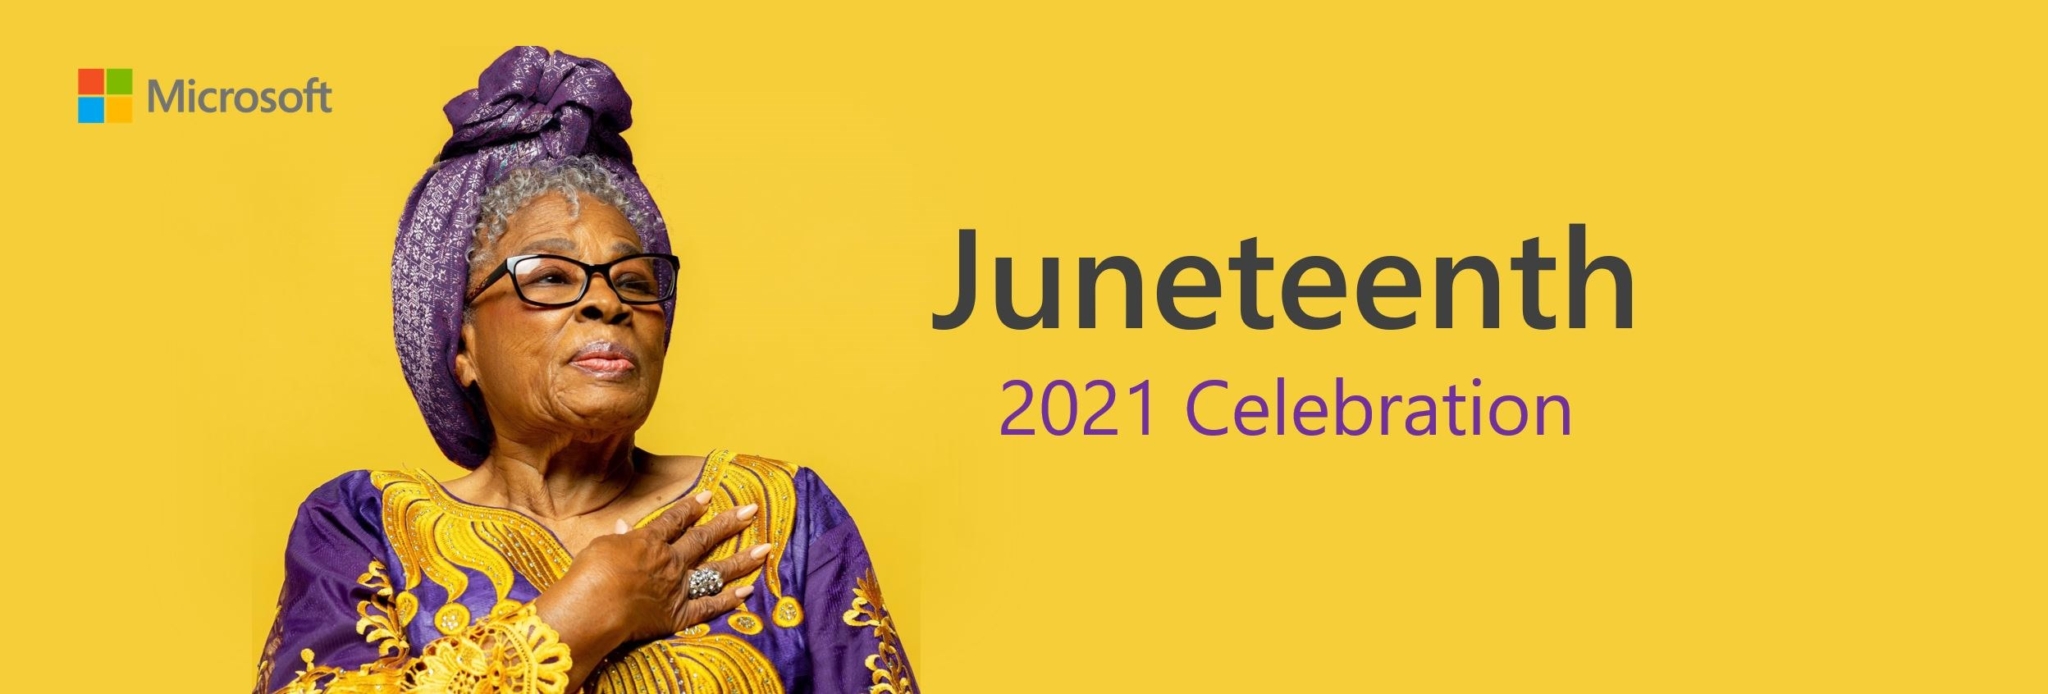 Juneteenth Banner scaled 2021 Juneteenth Celebration by Microsoft